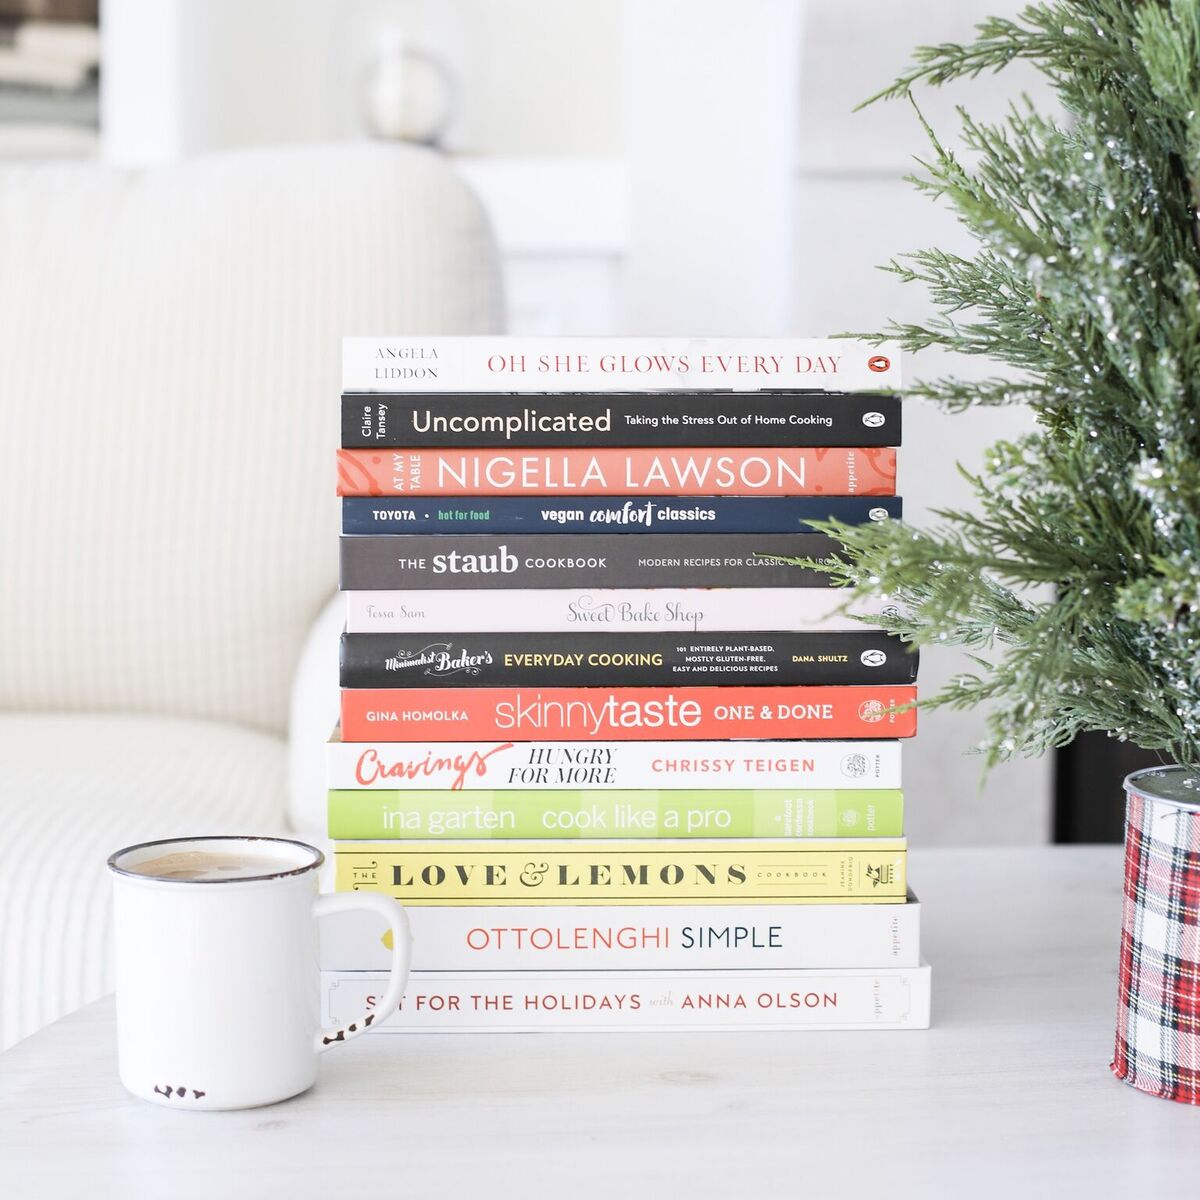 12 Days of Christmas Day 5 Giveaway: A baker's dozen (13) cookbooks valued at over $450!